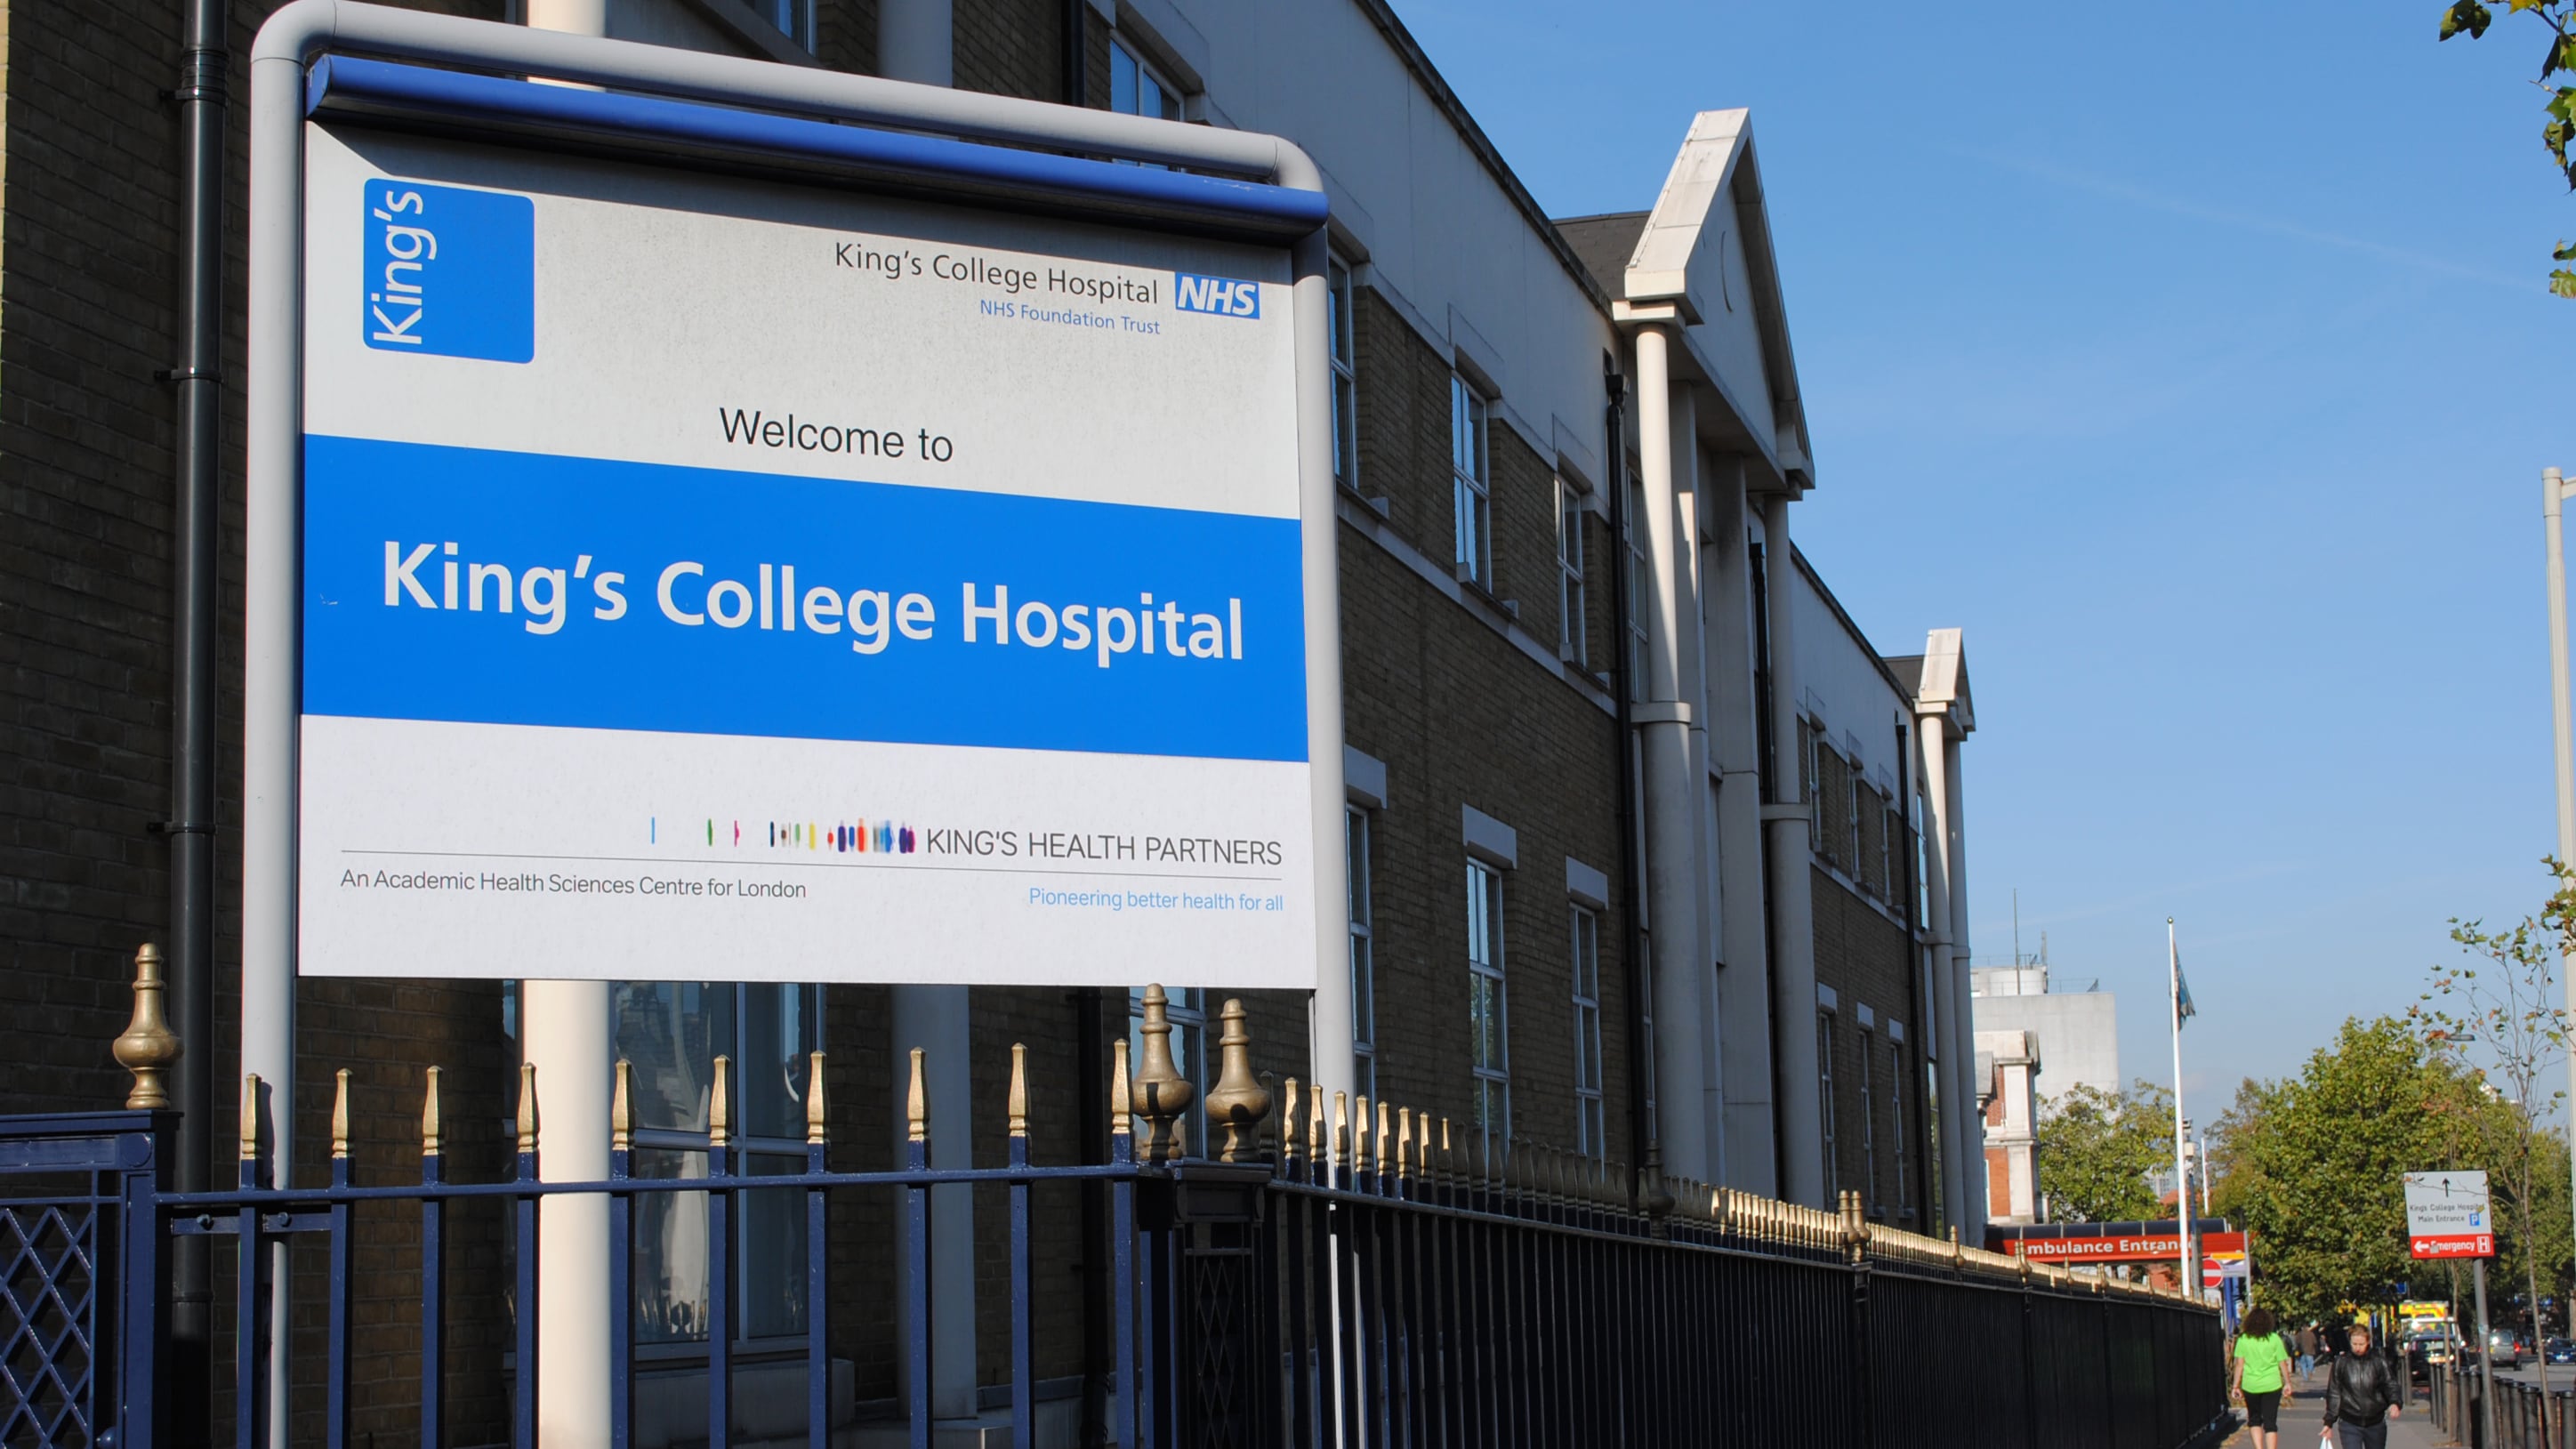 King’s College Hospital was among those affected by the cyber attack